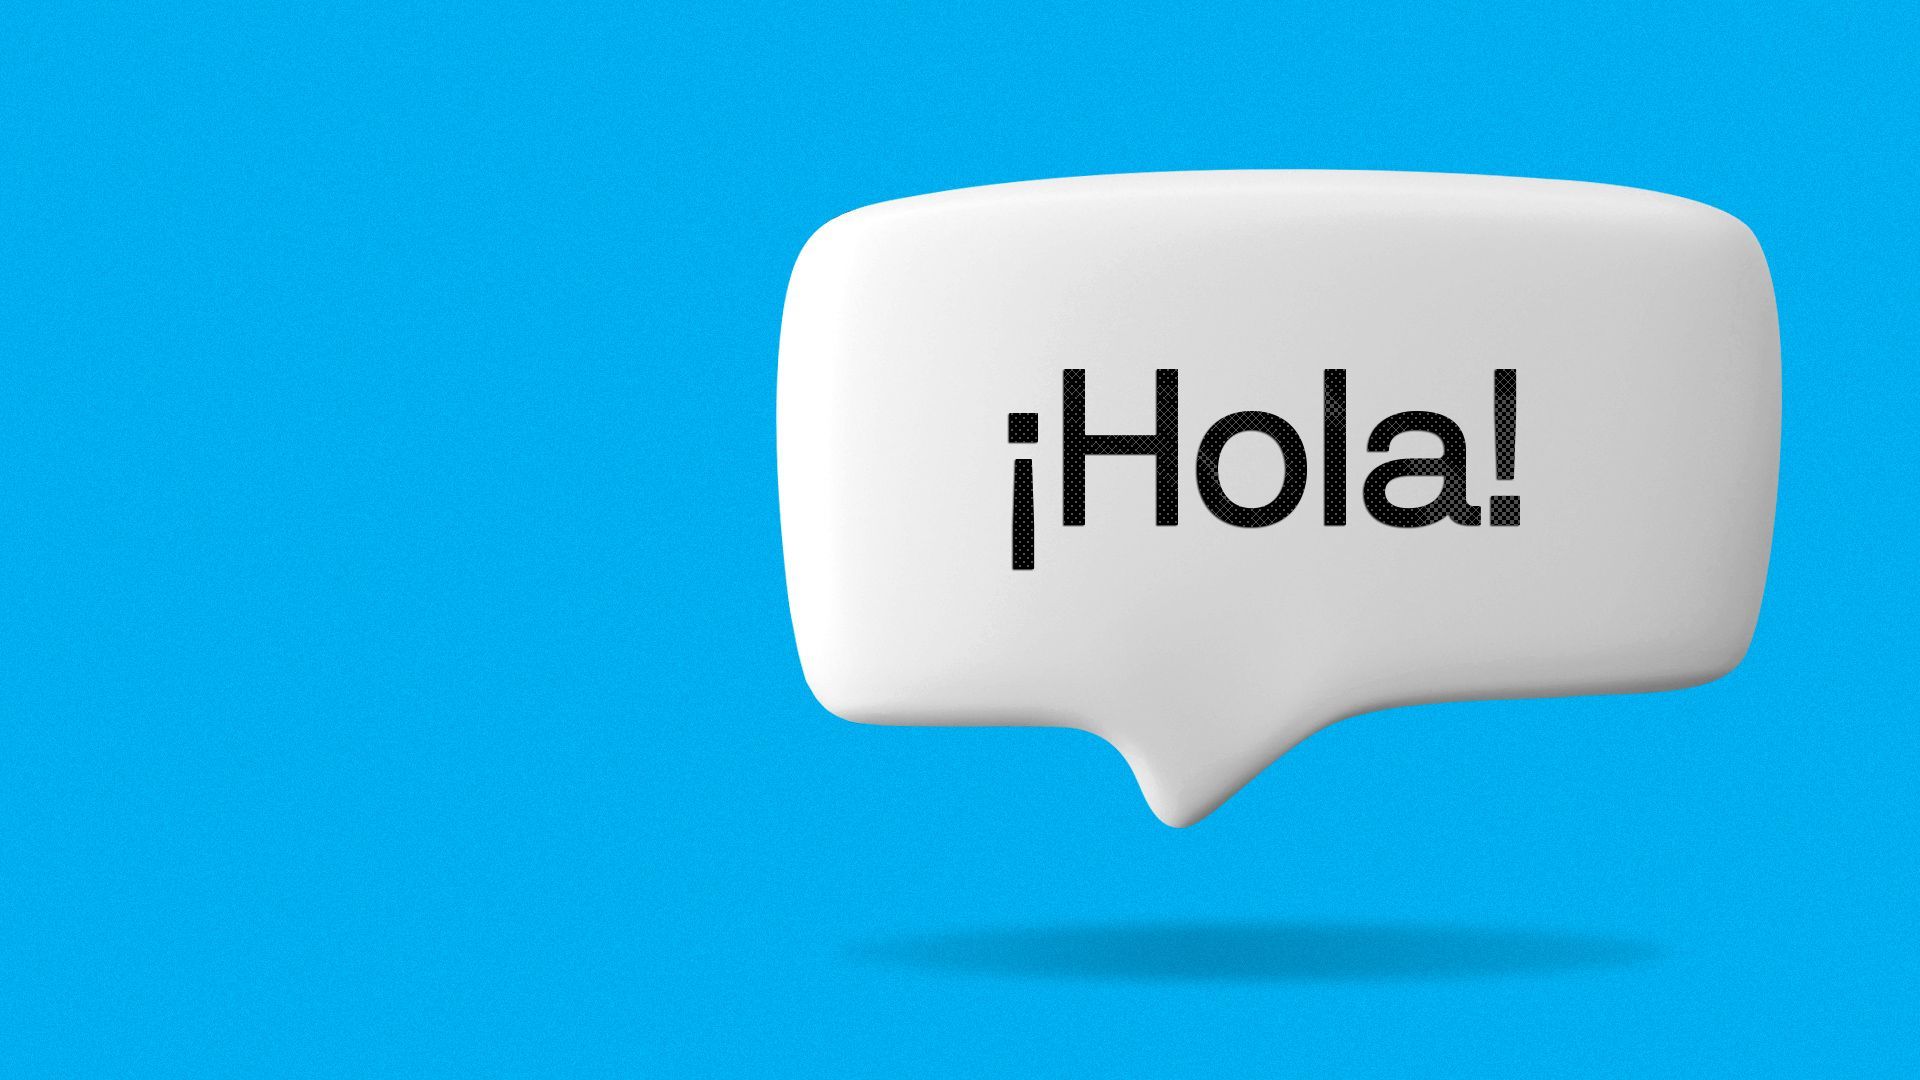 Illustration of a speech bubble that says ¡Hola!